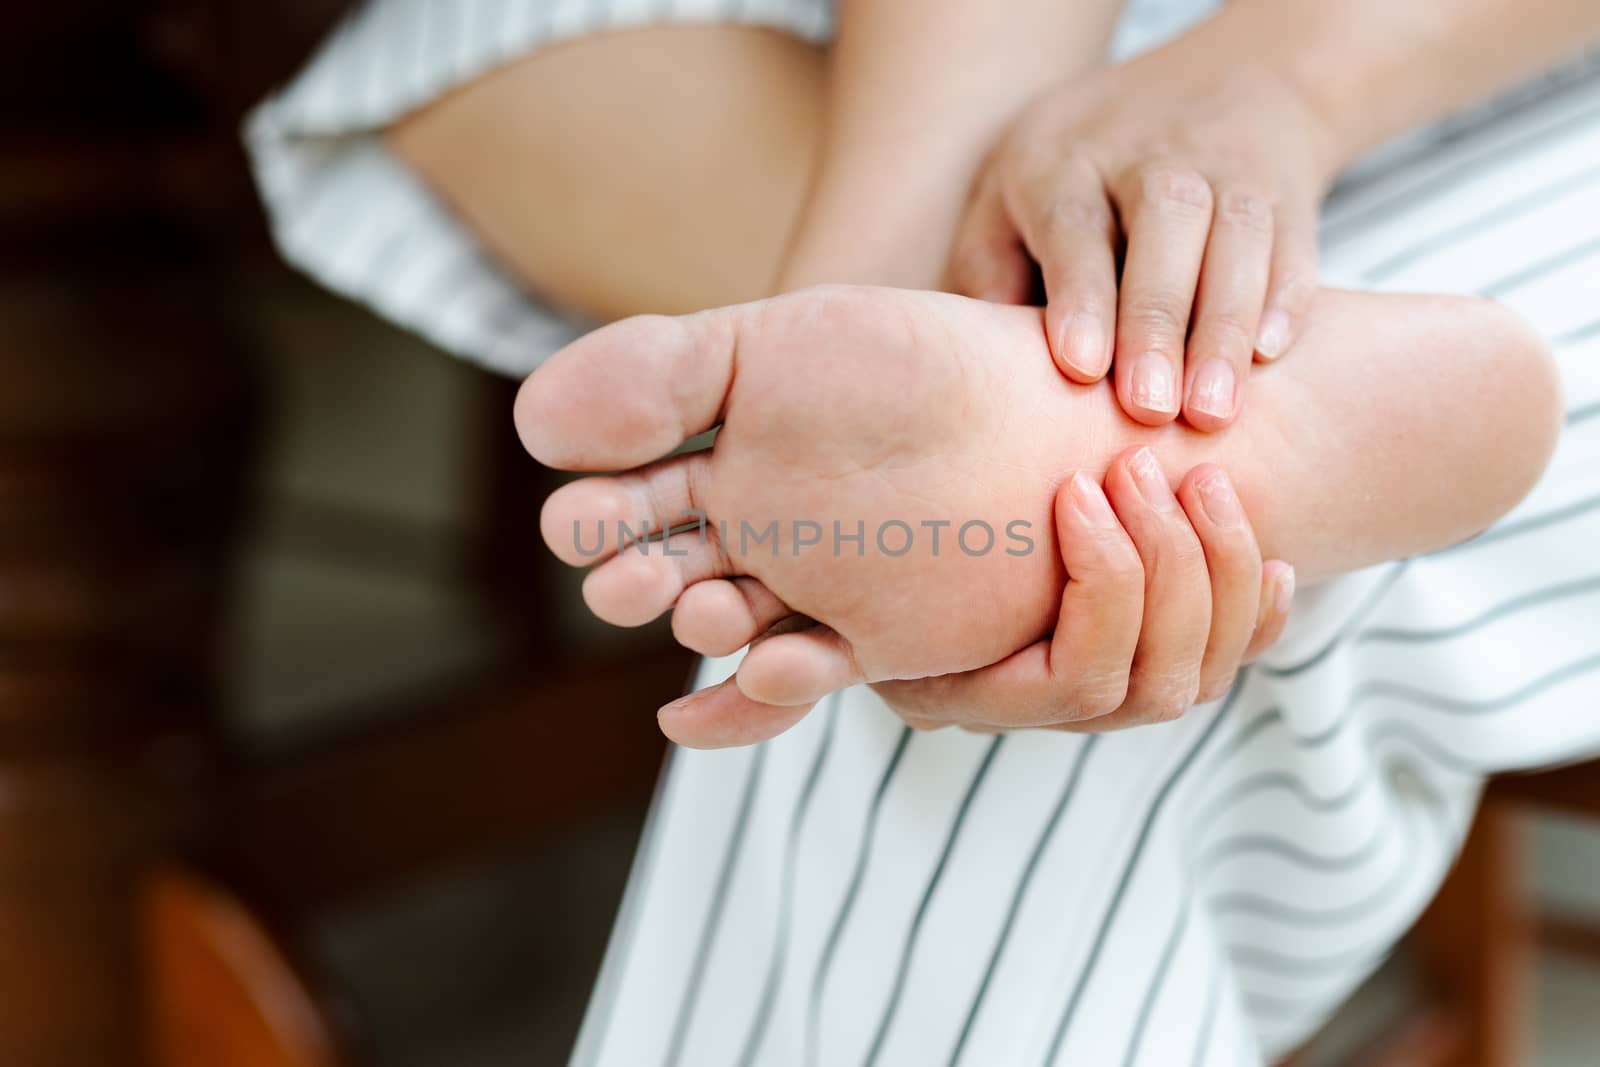 Woman massaging her painful barefoot, healthcare and medical con by psodaz